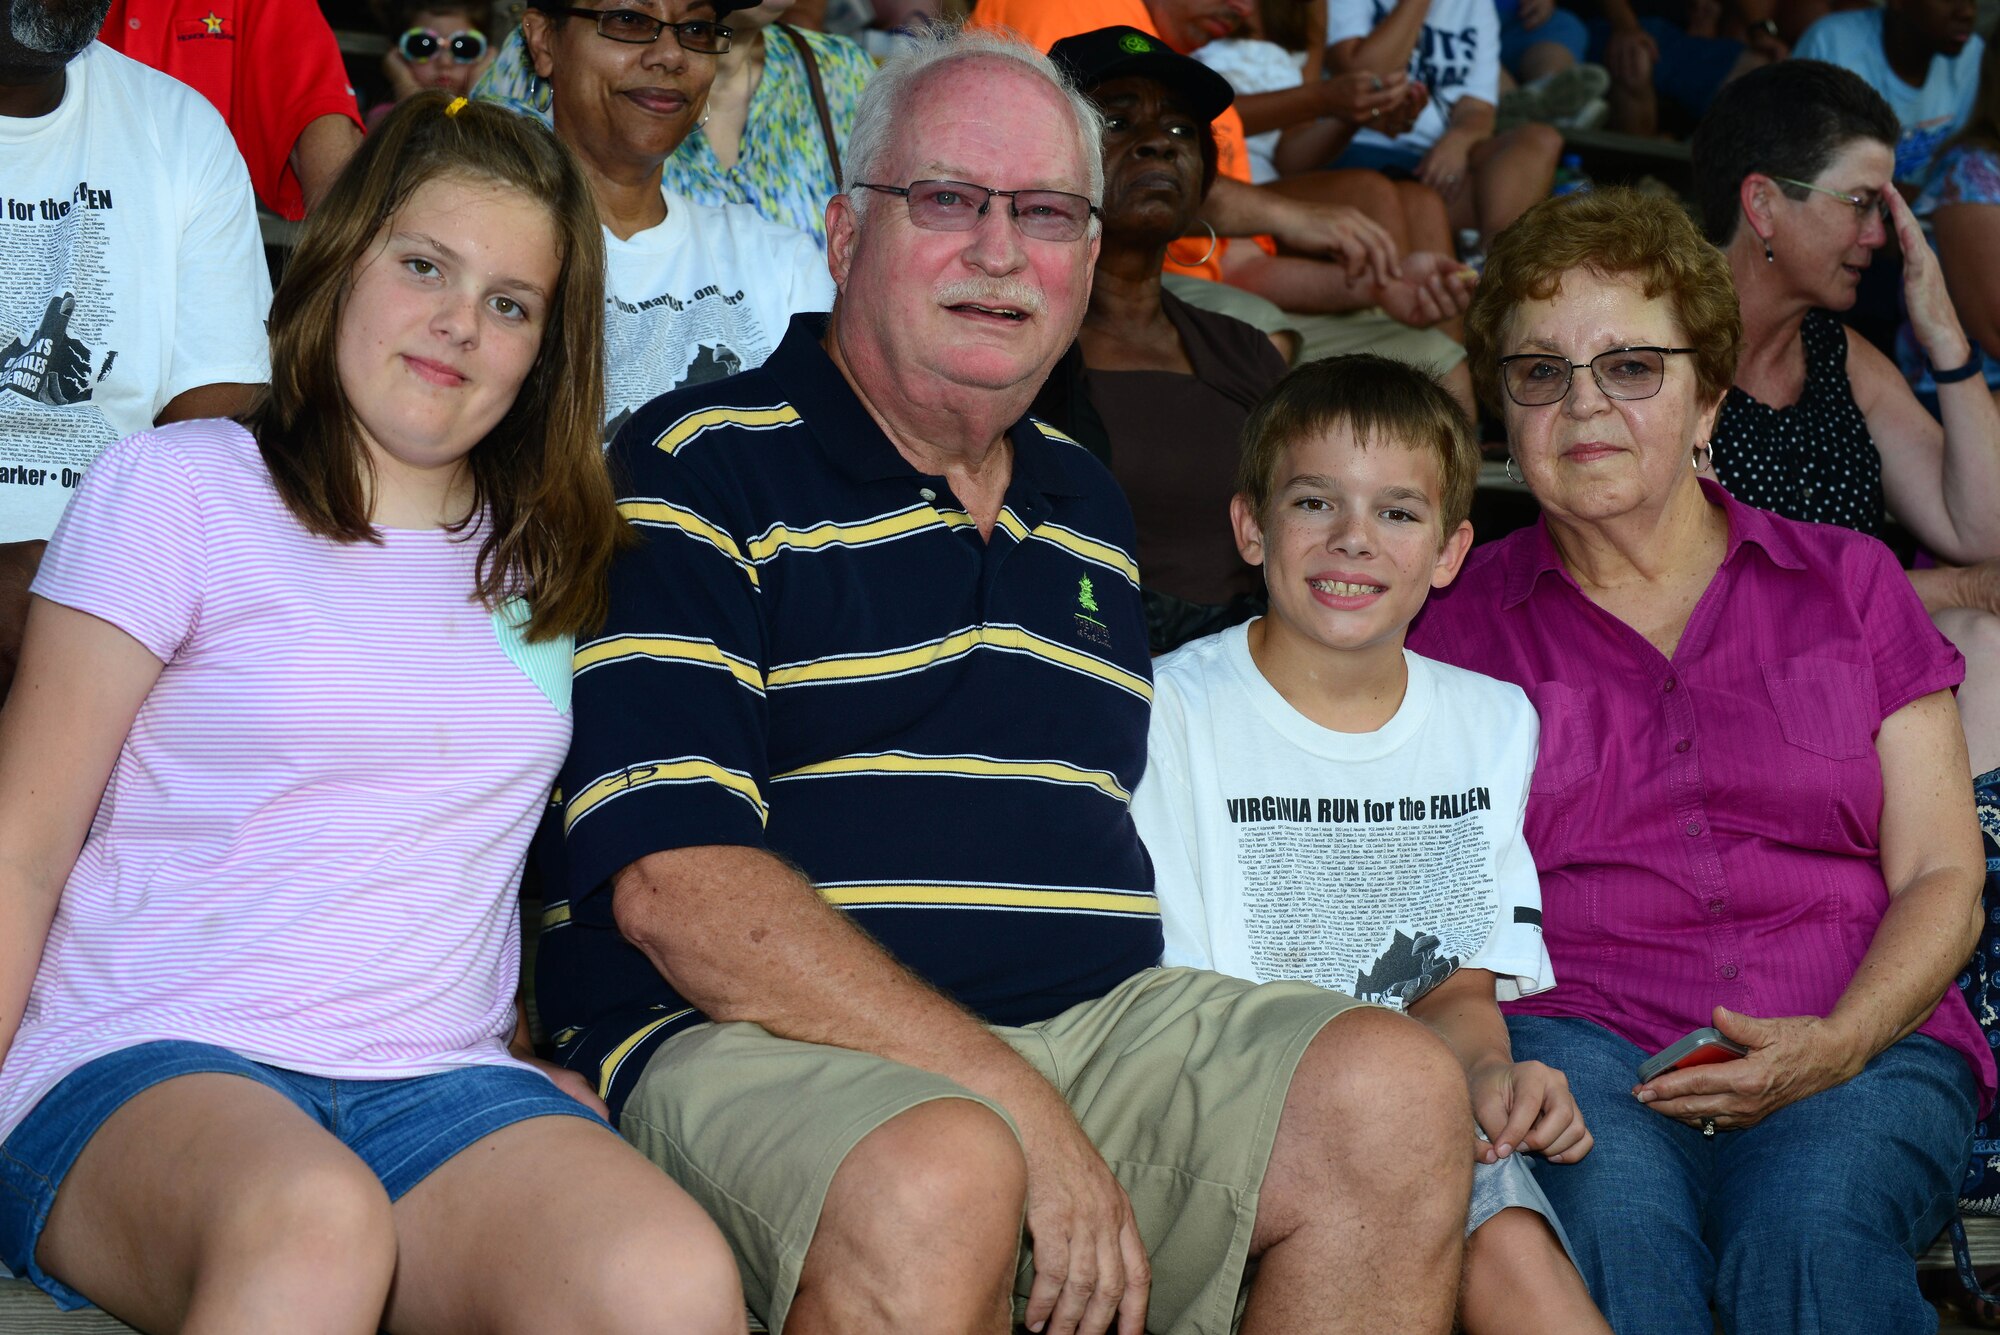 From left, Eniale Matheny, Richard Reynal, Derrik Matheny and Judy Reynal, family members of the late U.S. Army Sgt. Caryn Nouv who was killed in action July 27, 2013, attended the Peninsula Pilots baseball team’s 2nd Annual Gold Star Family Appreciation Night in Hampton, Va., July 23, 2014. The family has used the Fort Eustis Gold Star Family program’s services to help with the healing process after their loss. (U.S. Air Force photo by Airman 1st Class Kimberly Nagle/Released)